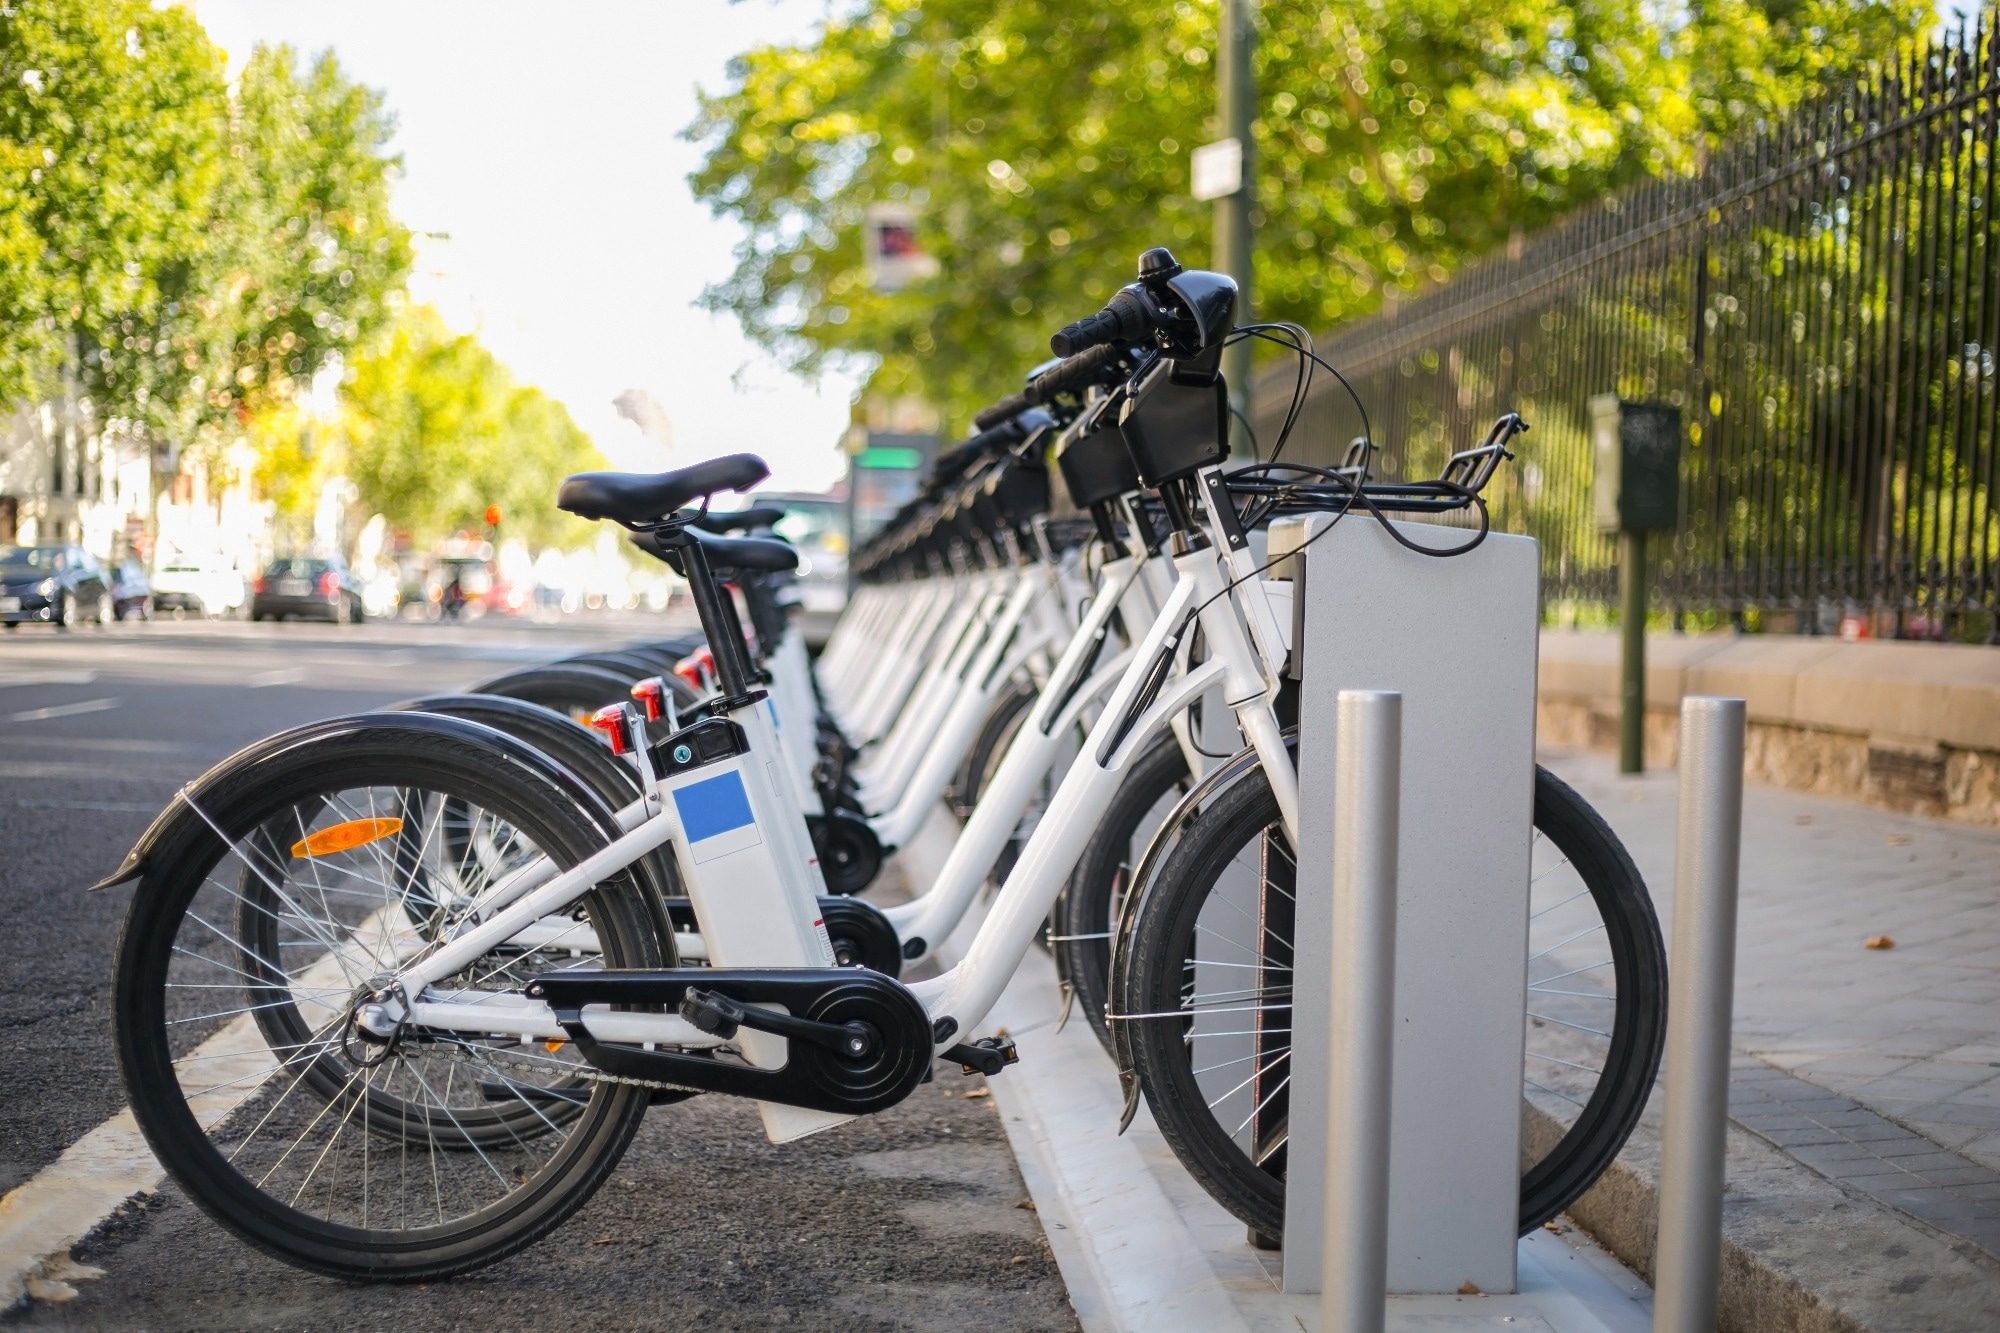 Electric bicycles (e-bikes) are an increasingly common pediatric public health problem